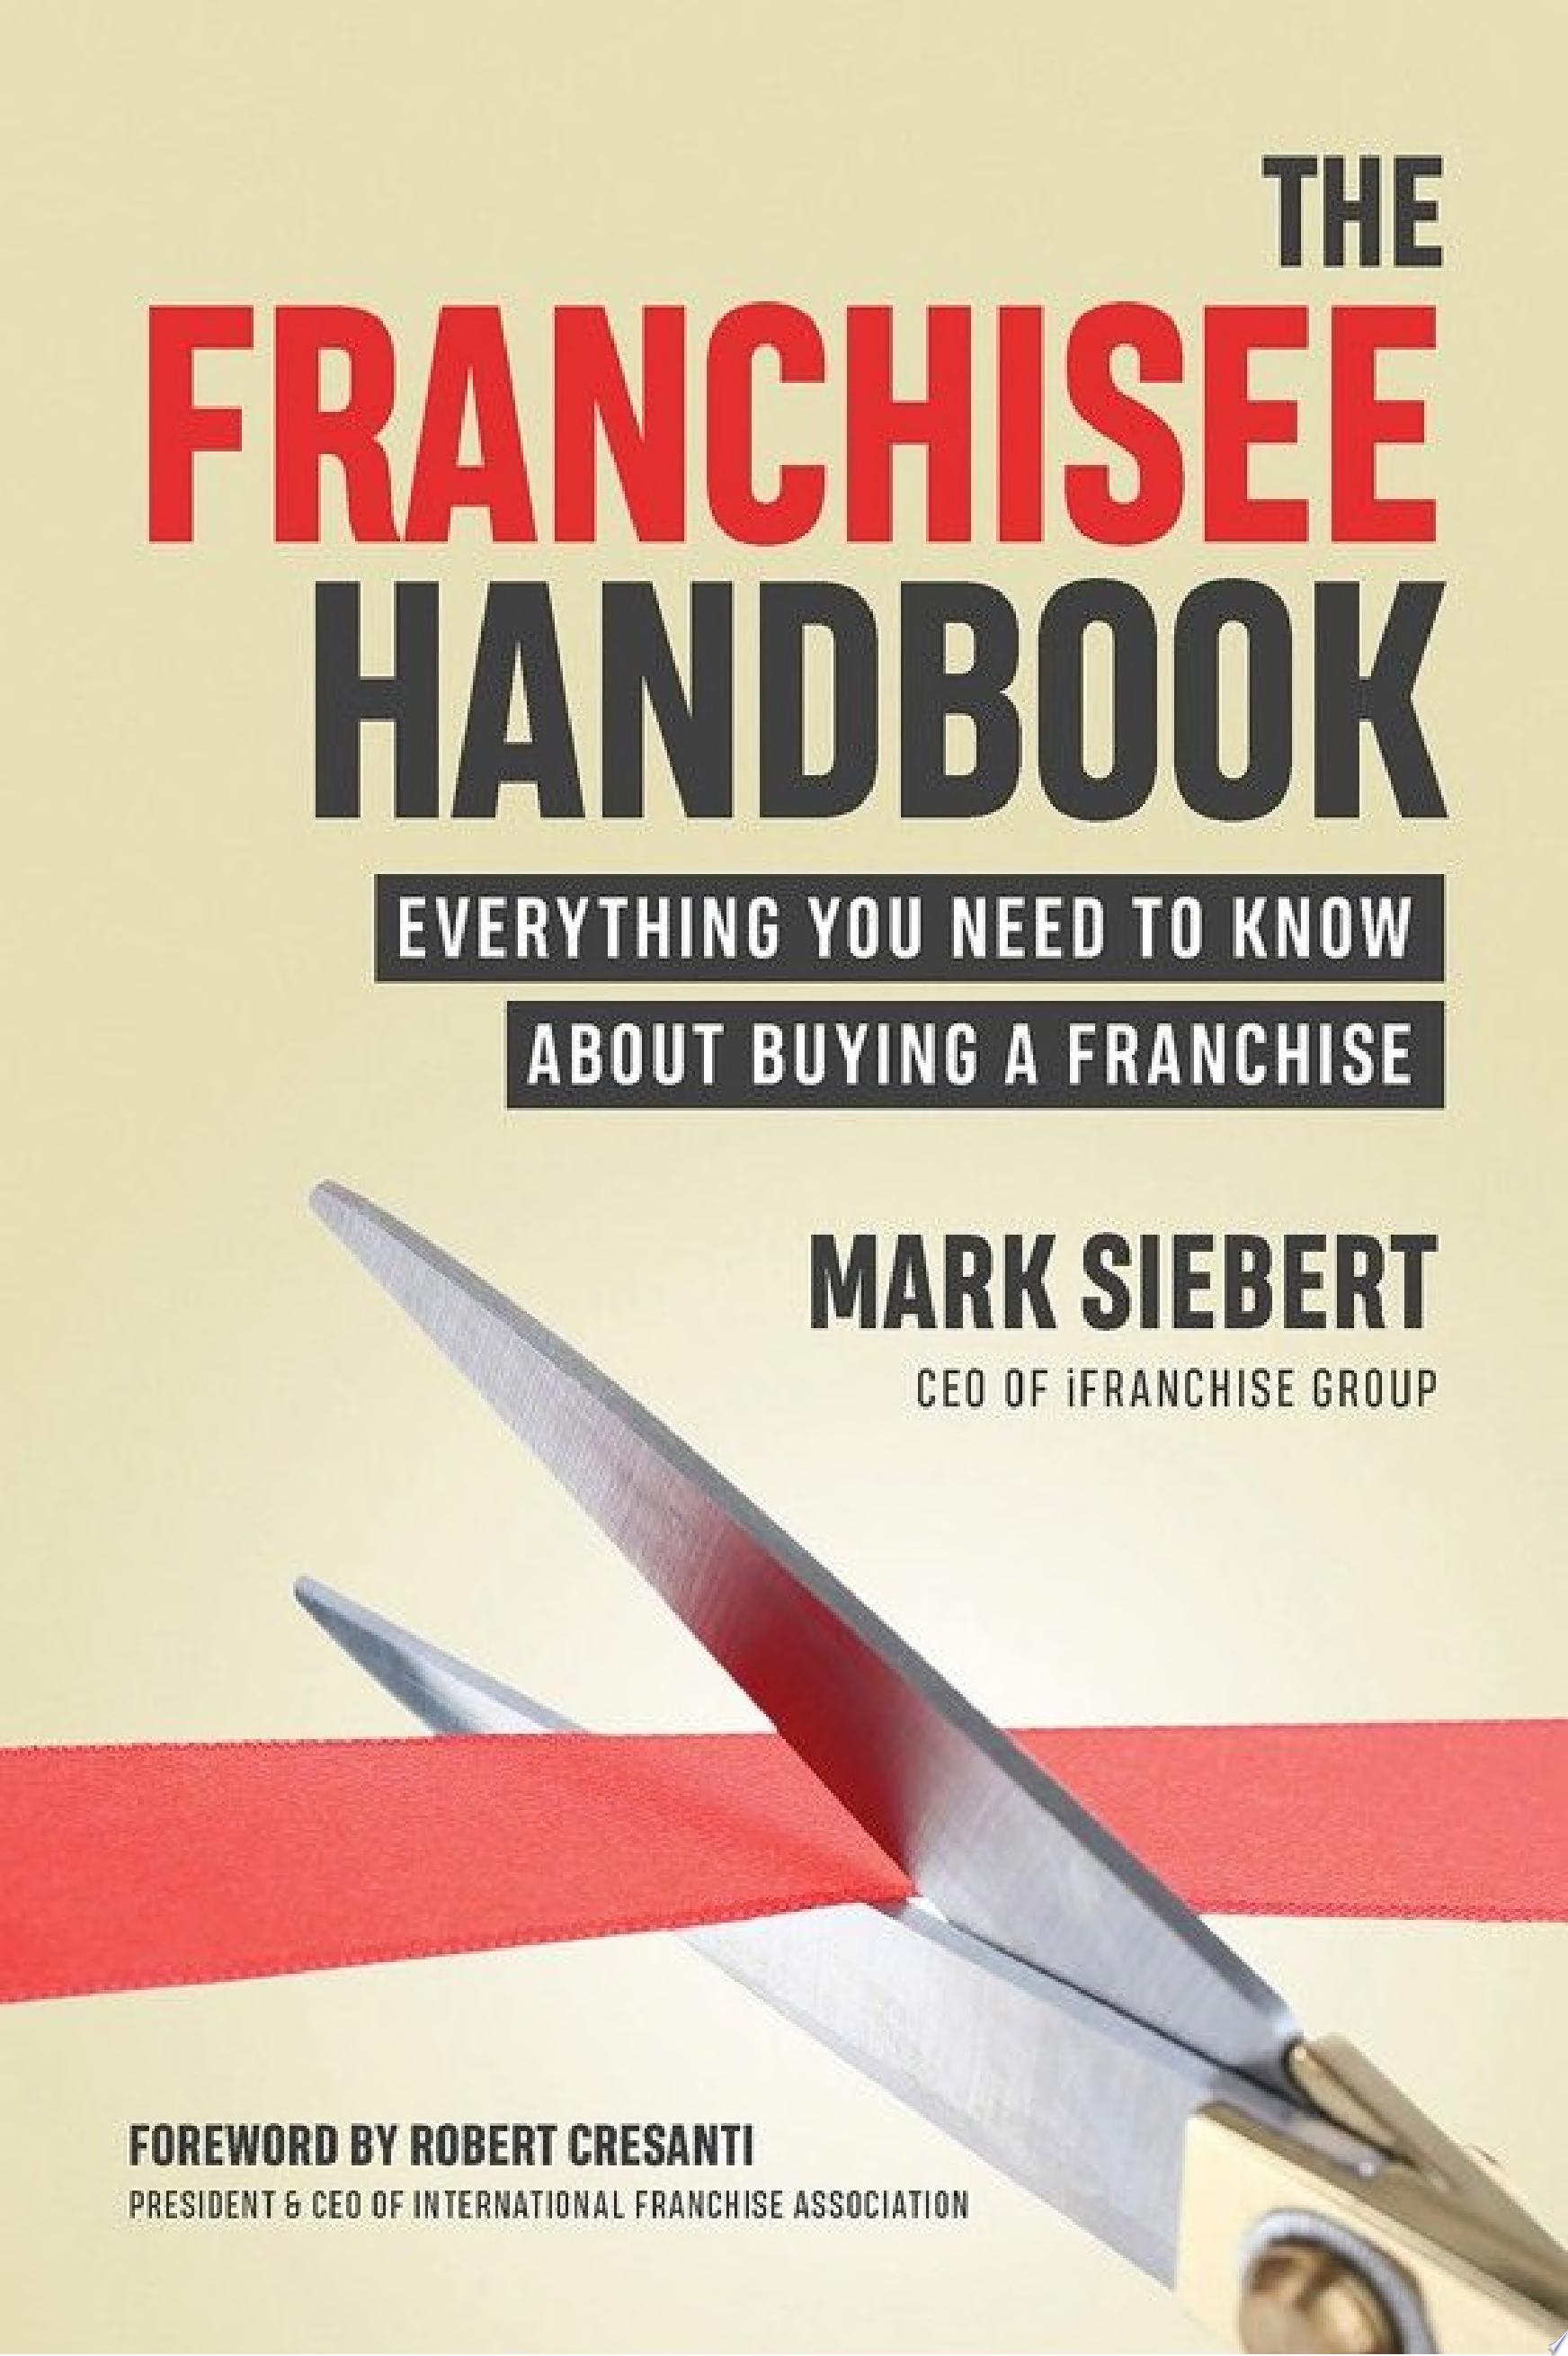 Image for "The Franchisee Handbook"